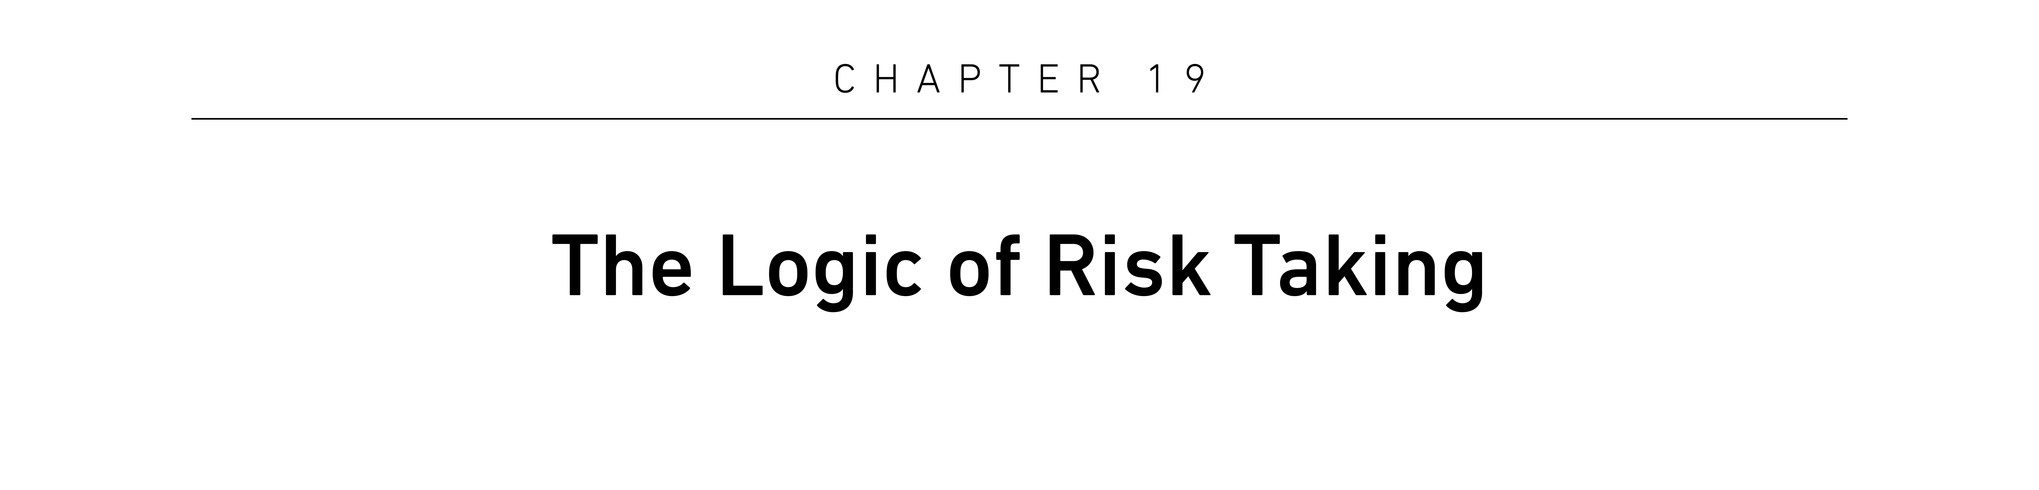 Chapter 19 The Logic of Risk Taking